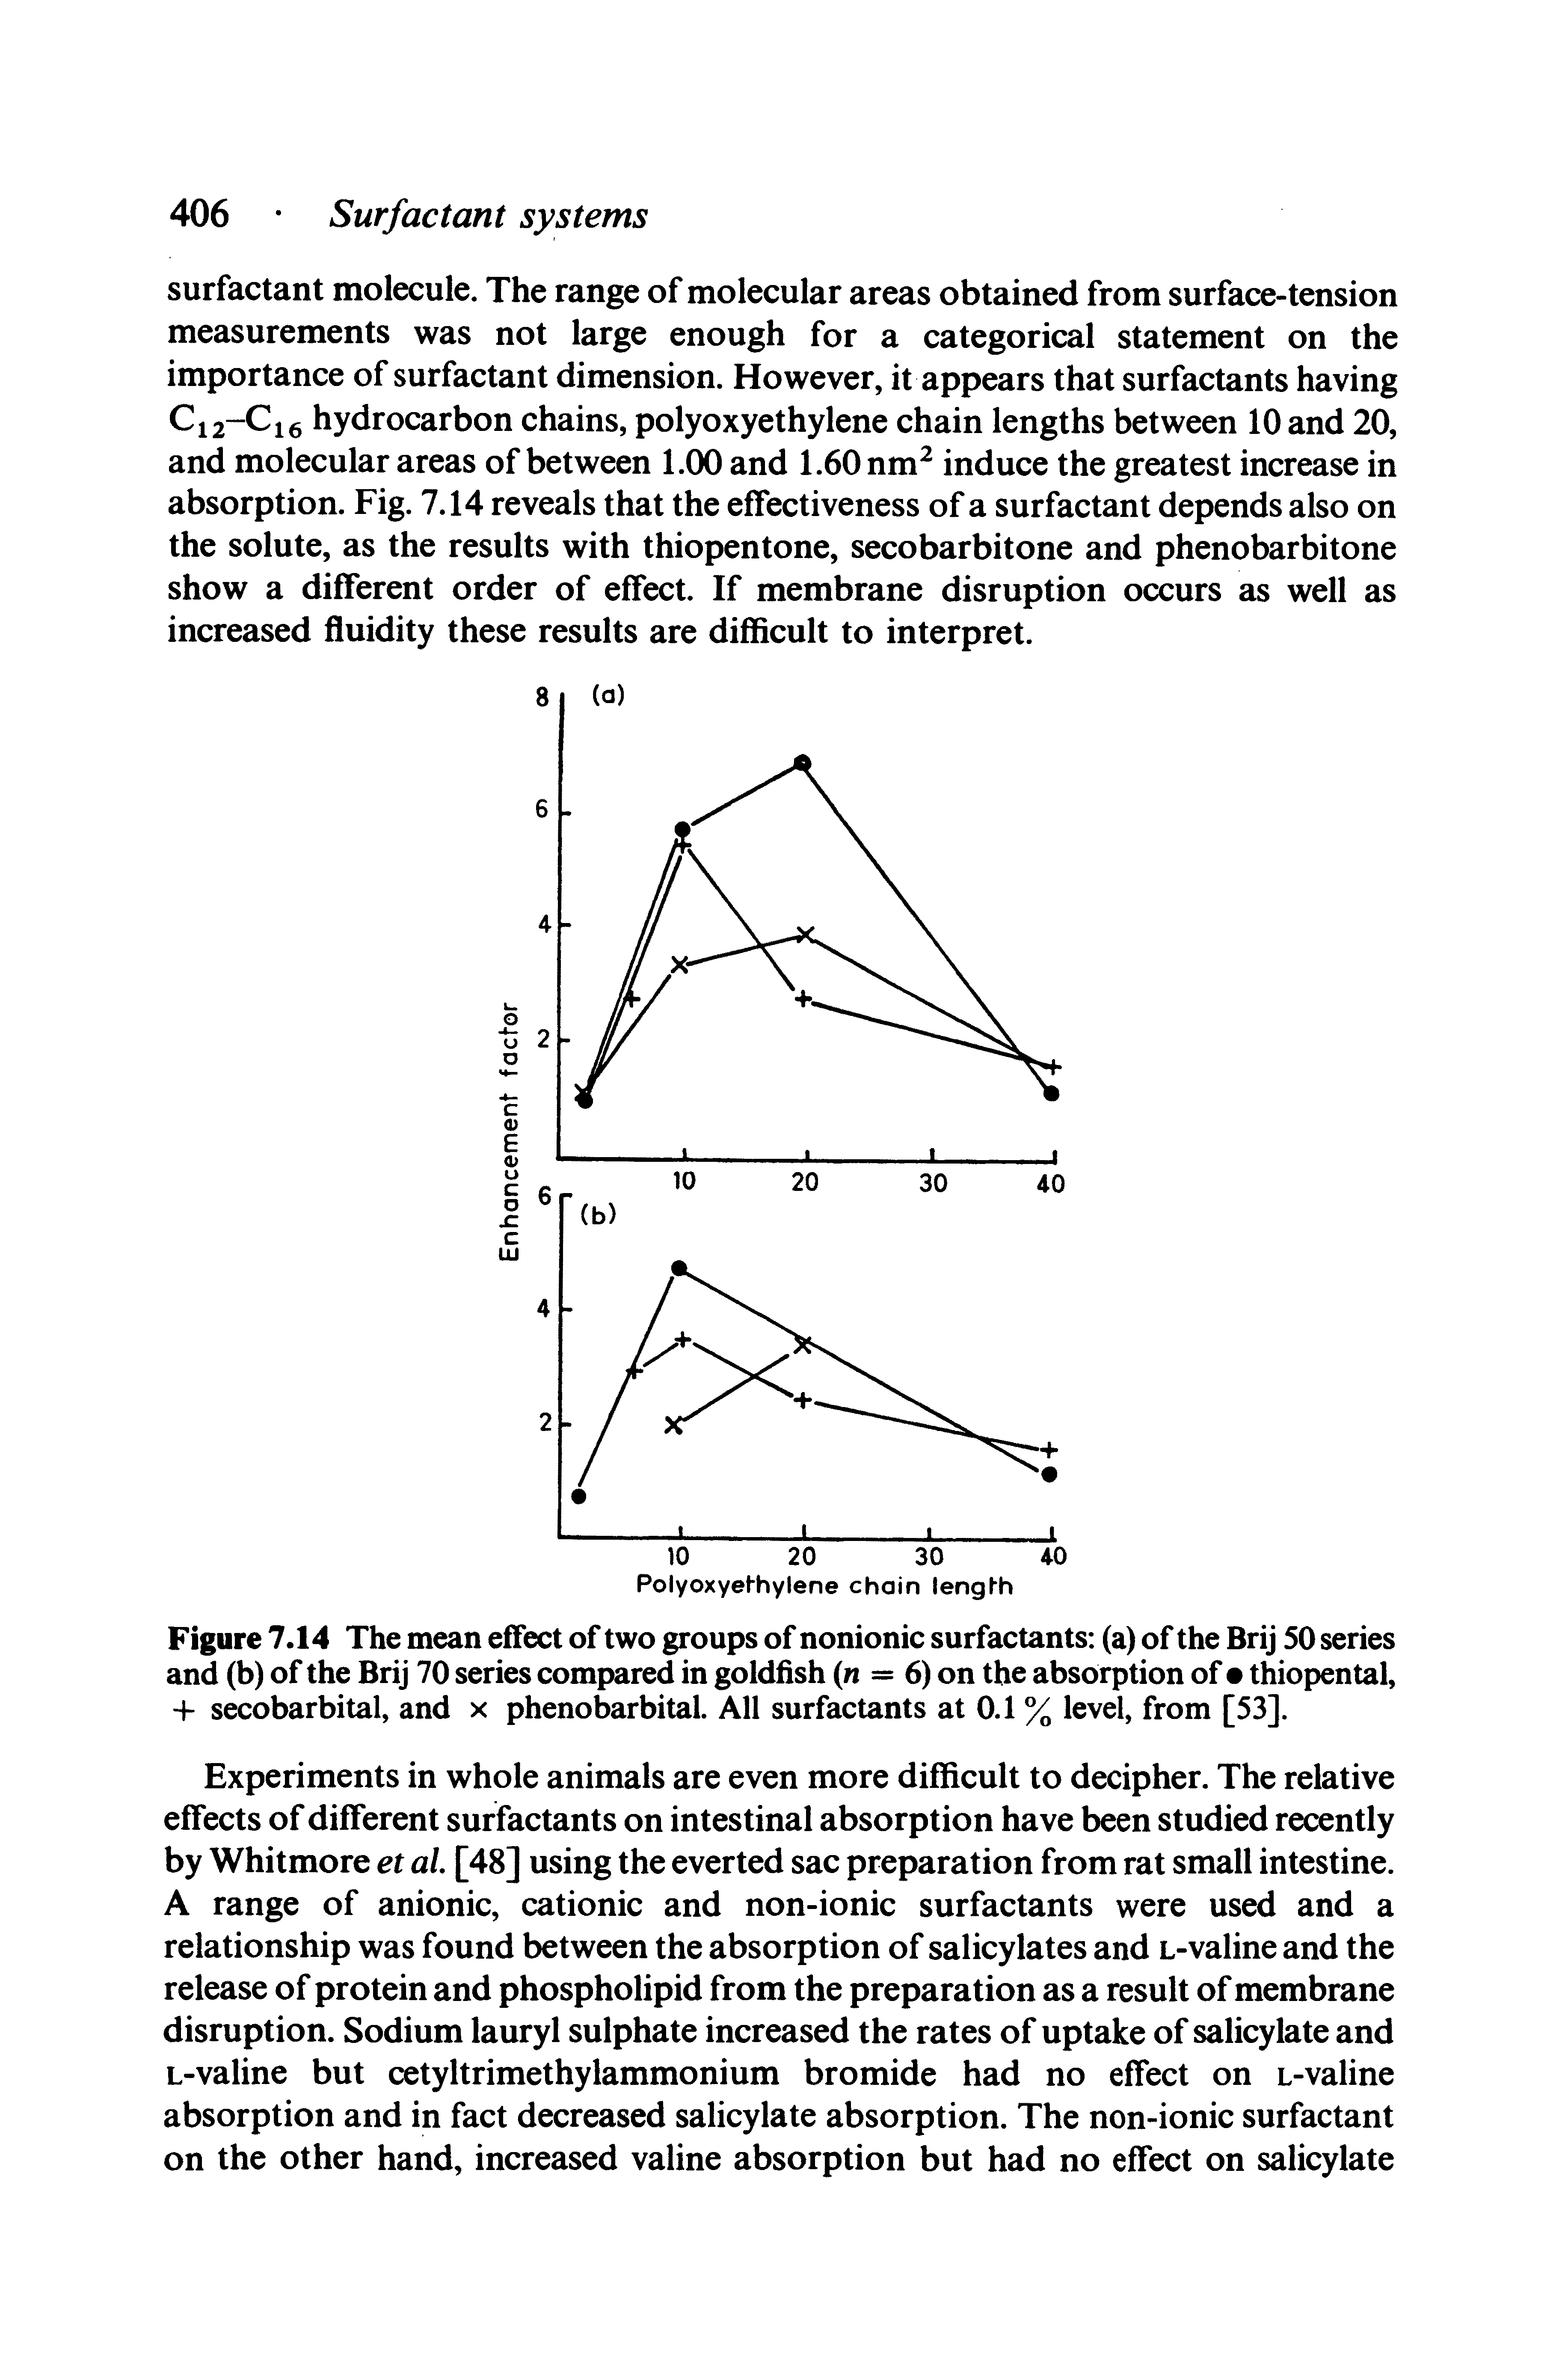 Figure 7.14 The mean effect of two groups of nonionic surfactants (a) of the Brij 50 series and (b) of the Brij 70 series compared in goldfish n = 6) on the absorption of thiopental, + secobarbital, and x phenobarbital. All surfactants at 0.1 % level, from [53].